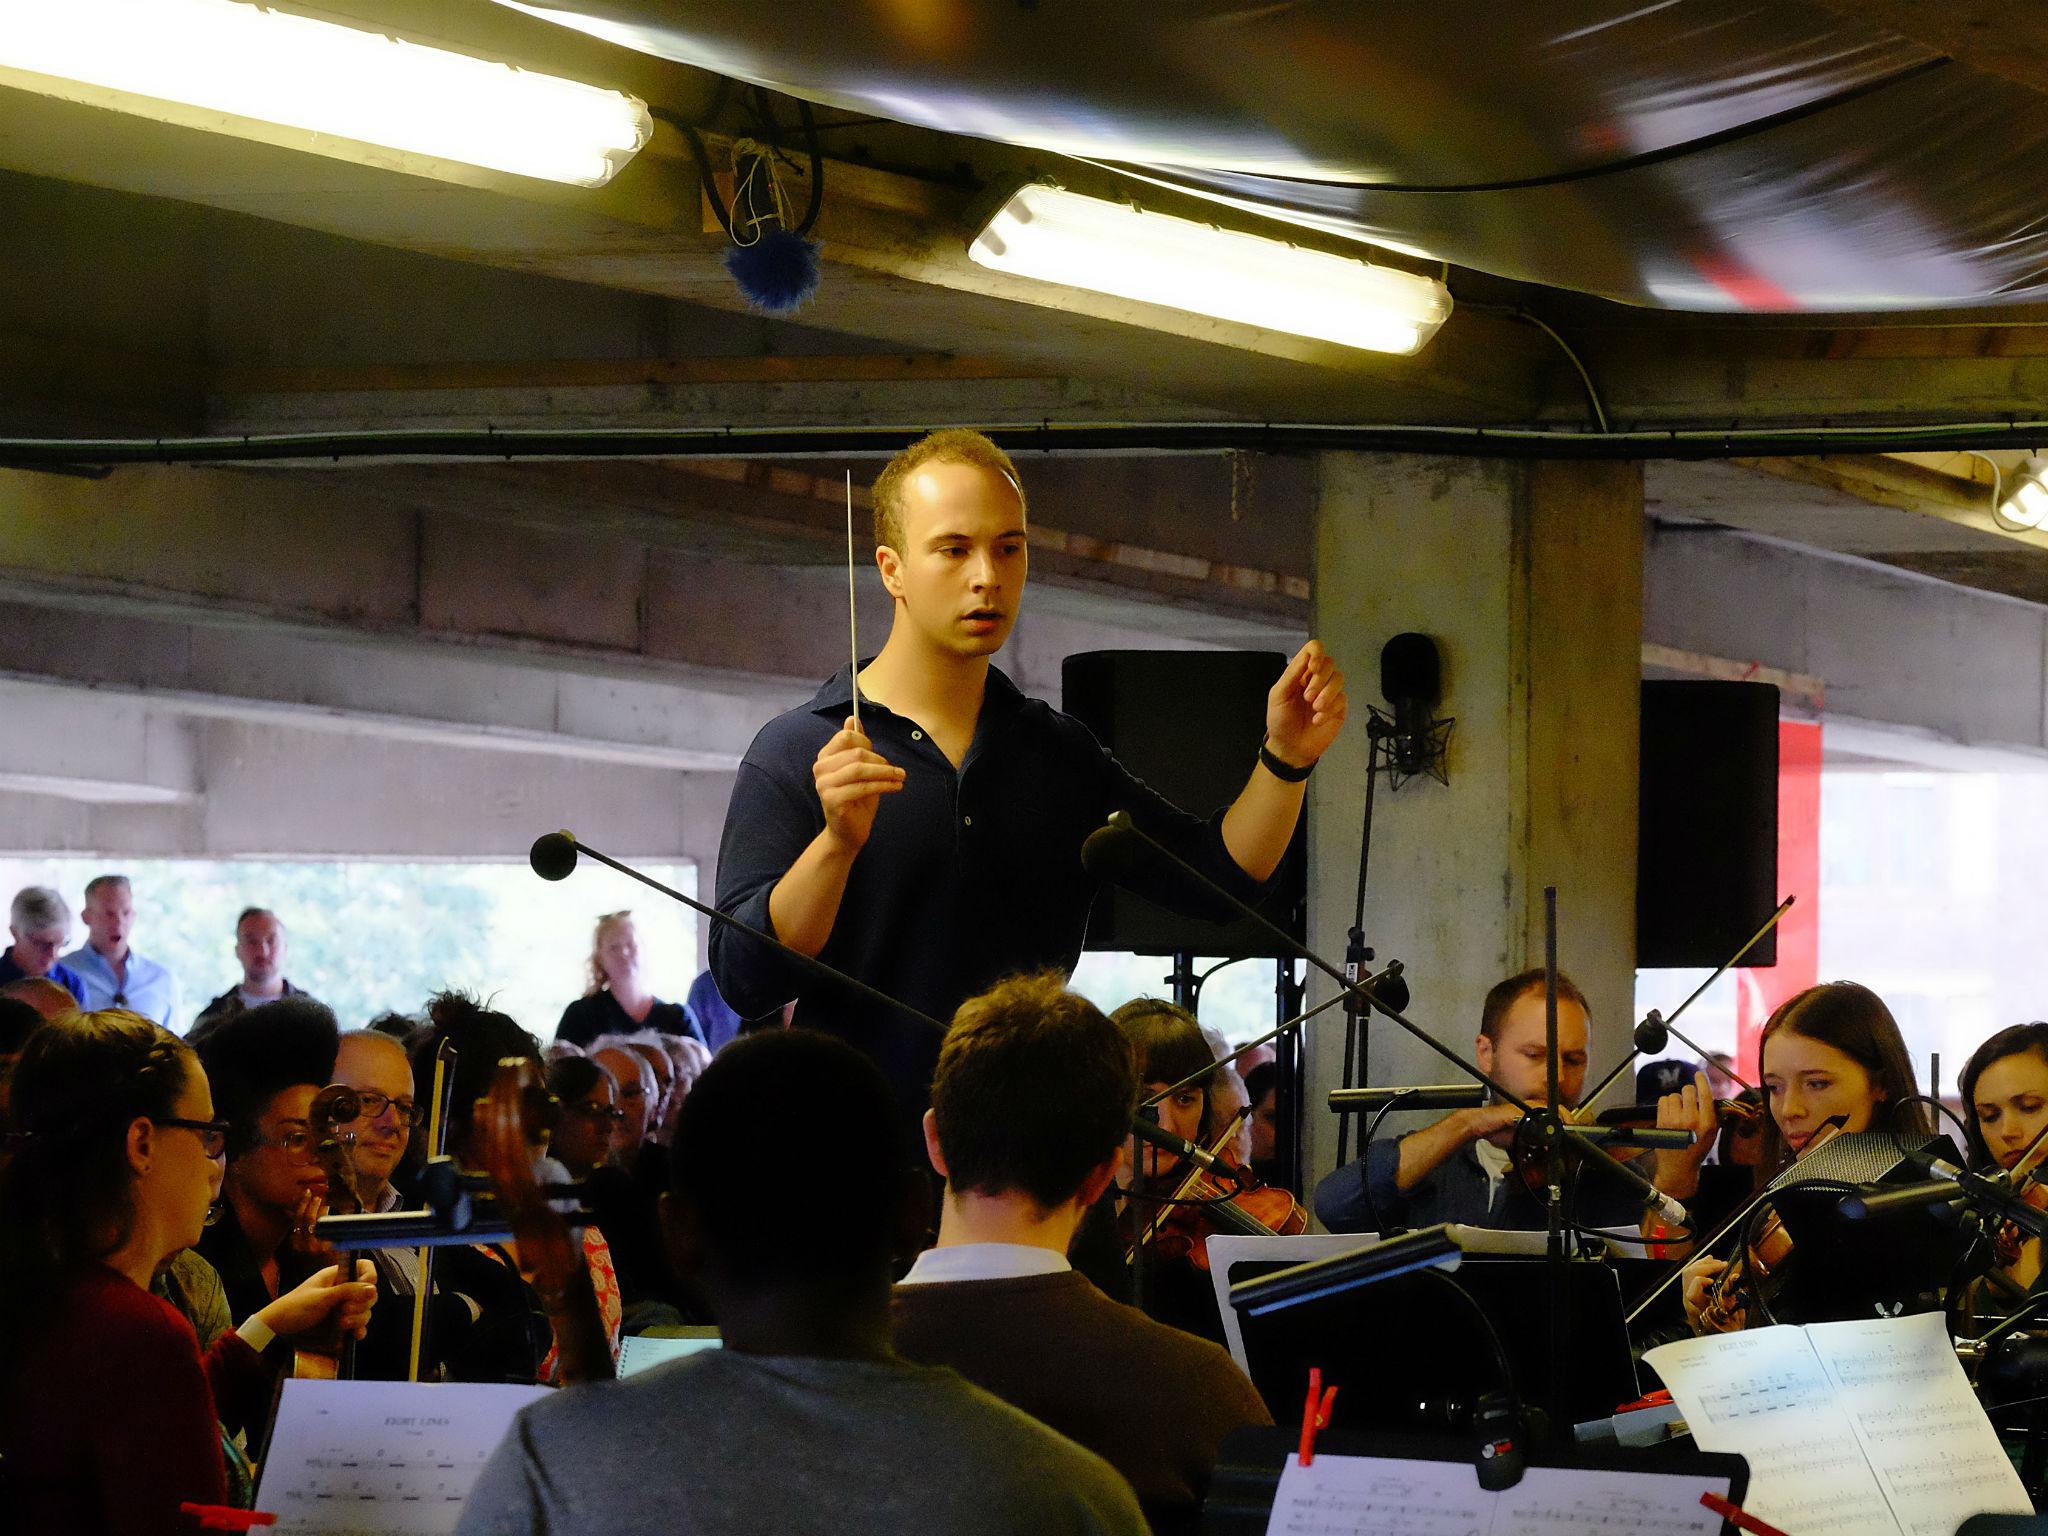 Christopher Stark conducts the Multi-Story Orchestra at the BBC Proms At…Bold Tendencies Multi-Storey Car Park in Peckham